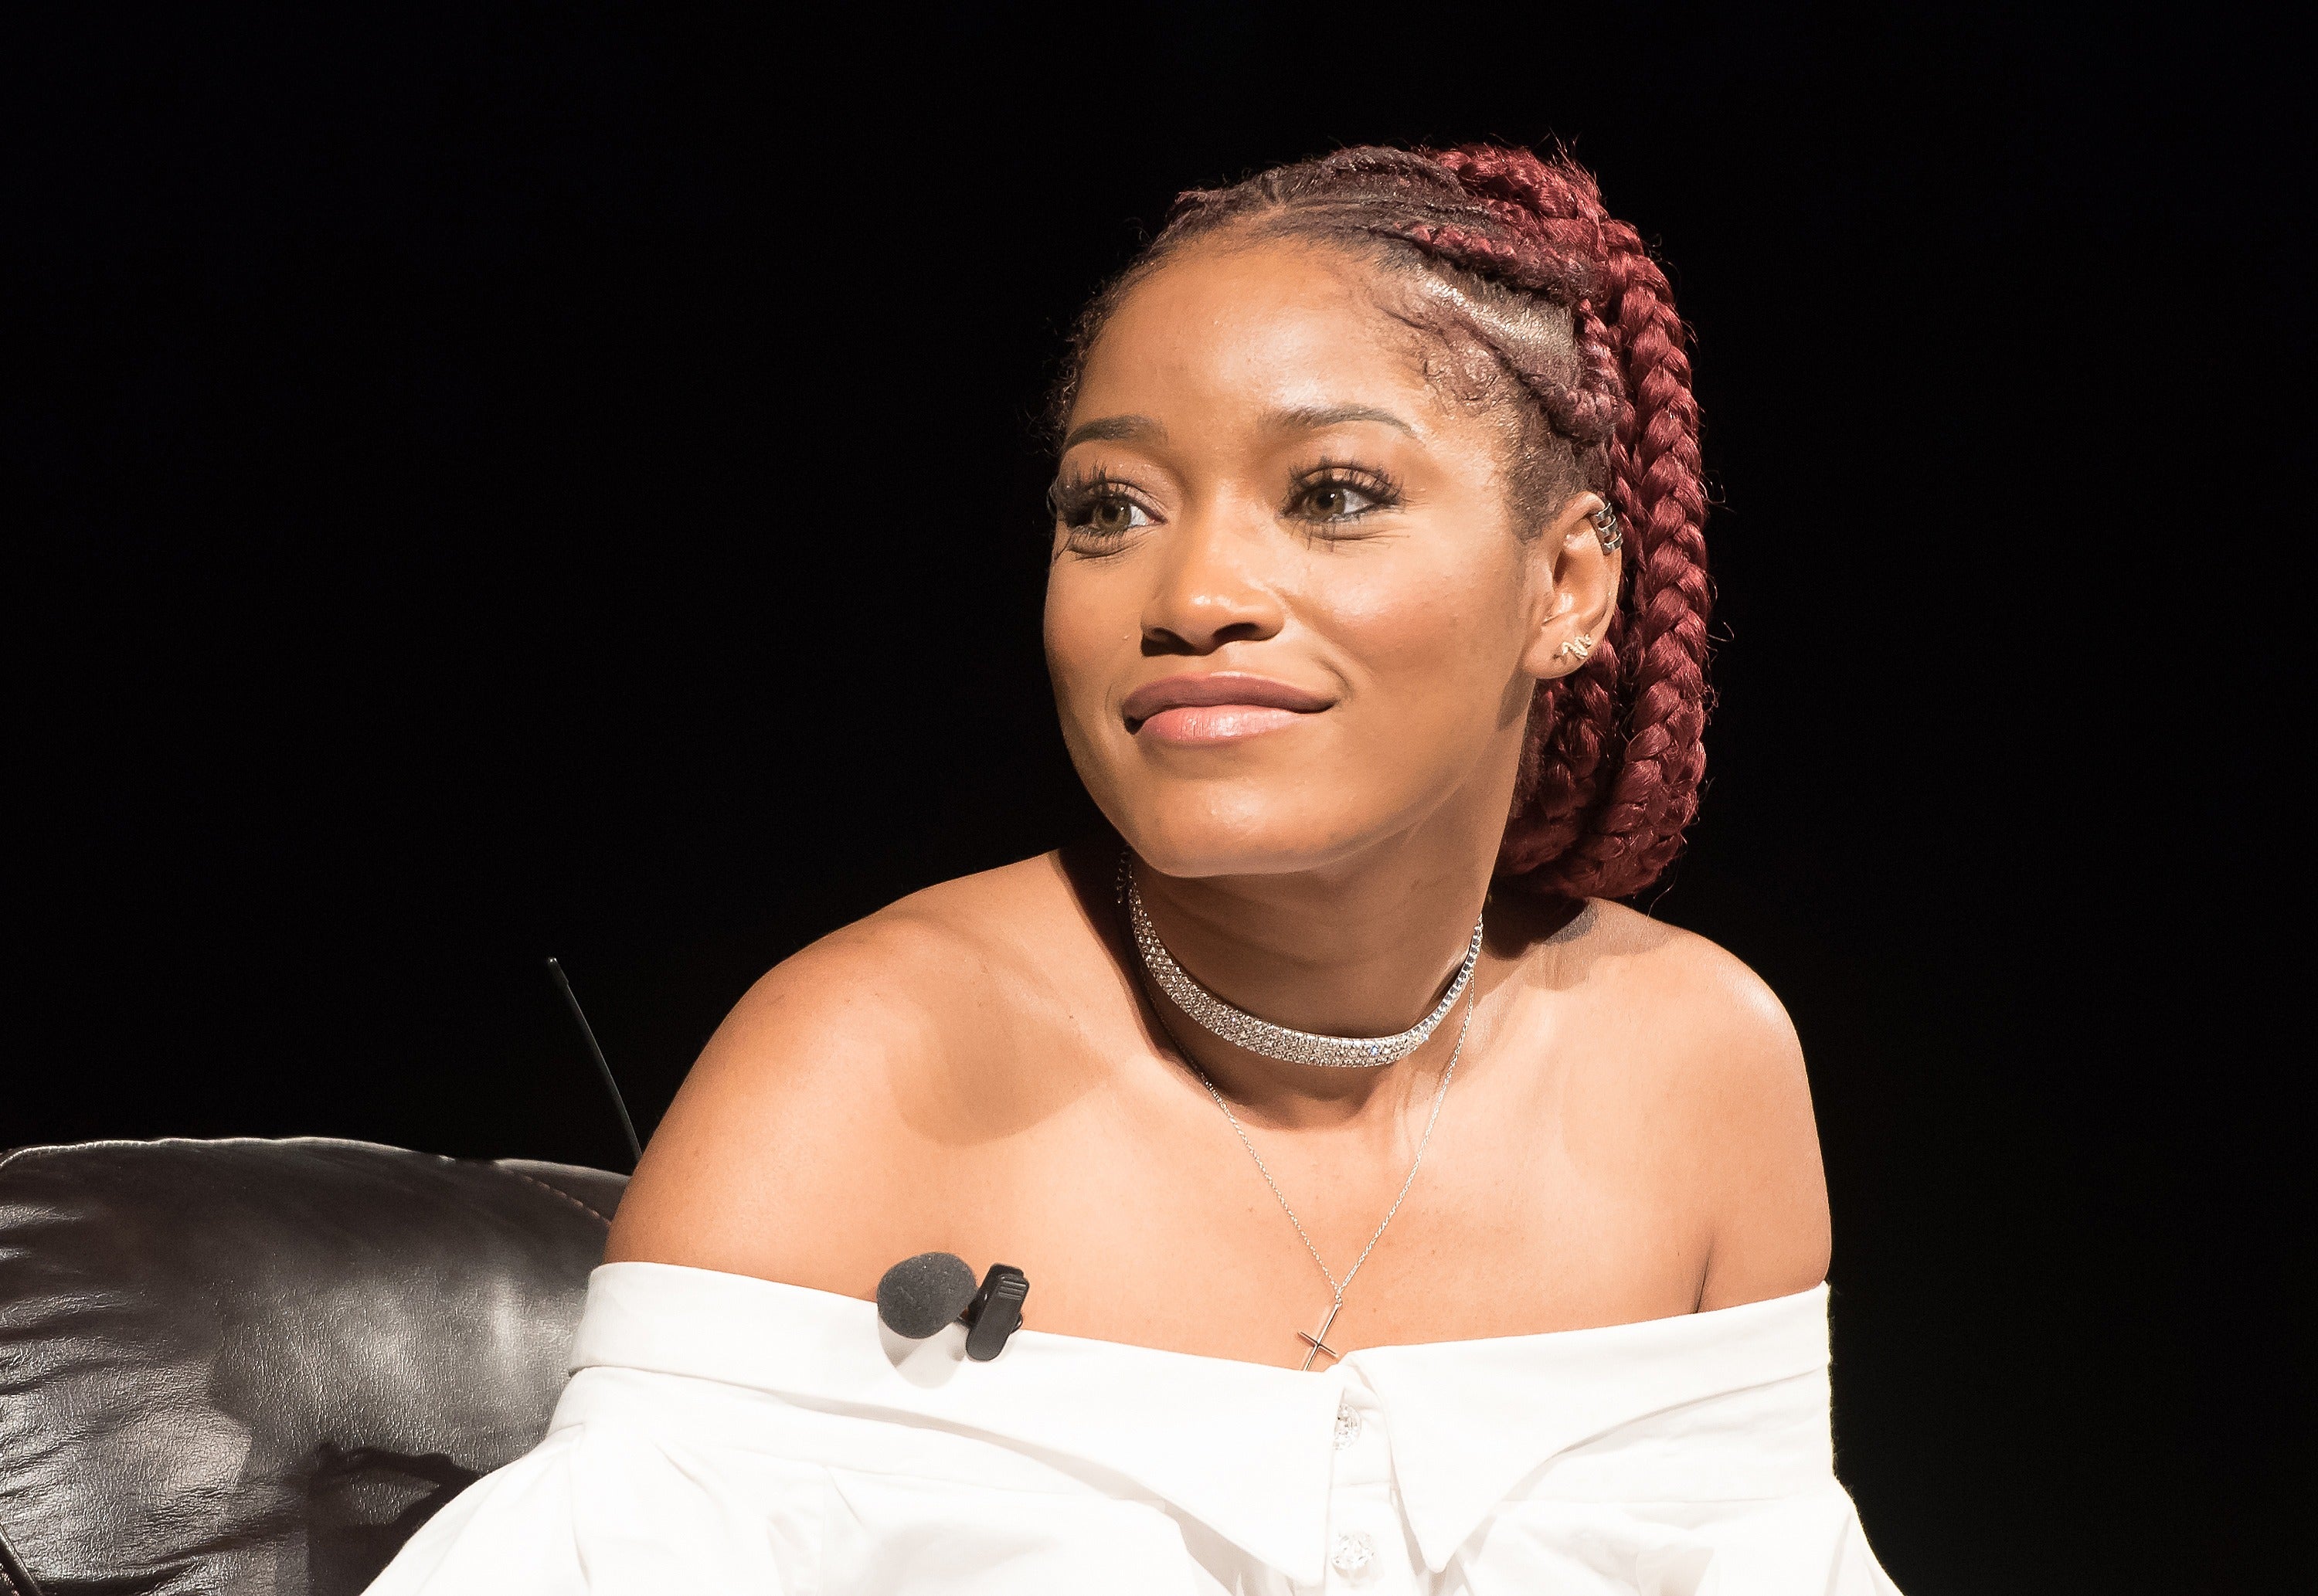 Keke Palmer's Pastel Purple Cut Is What Summer Hair Dreams Are Made Of
